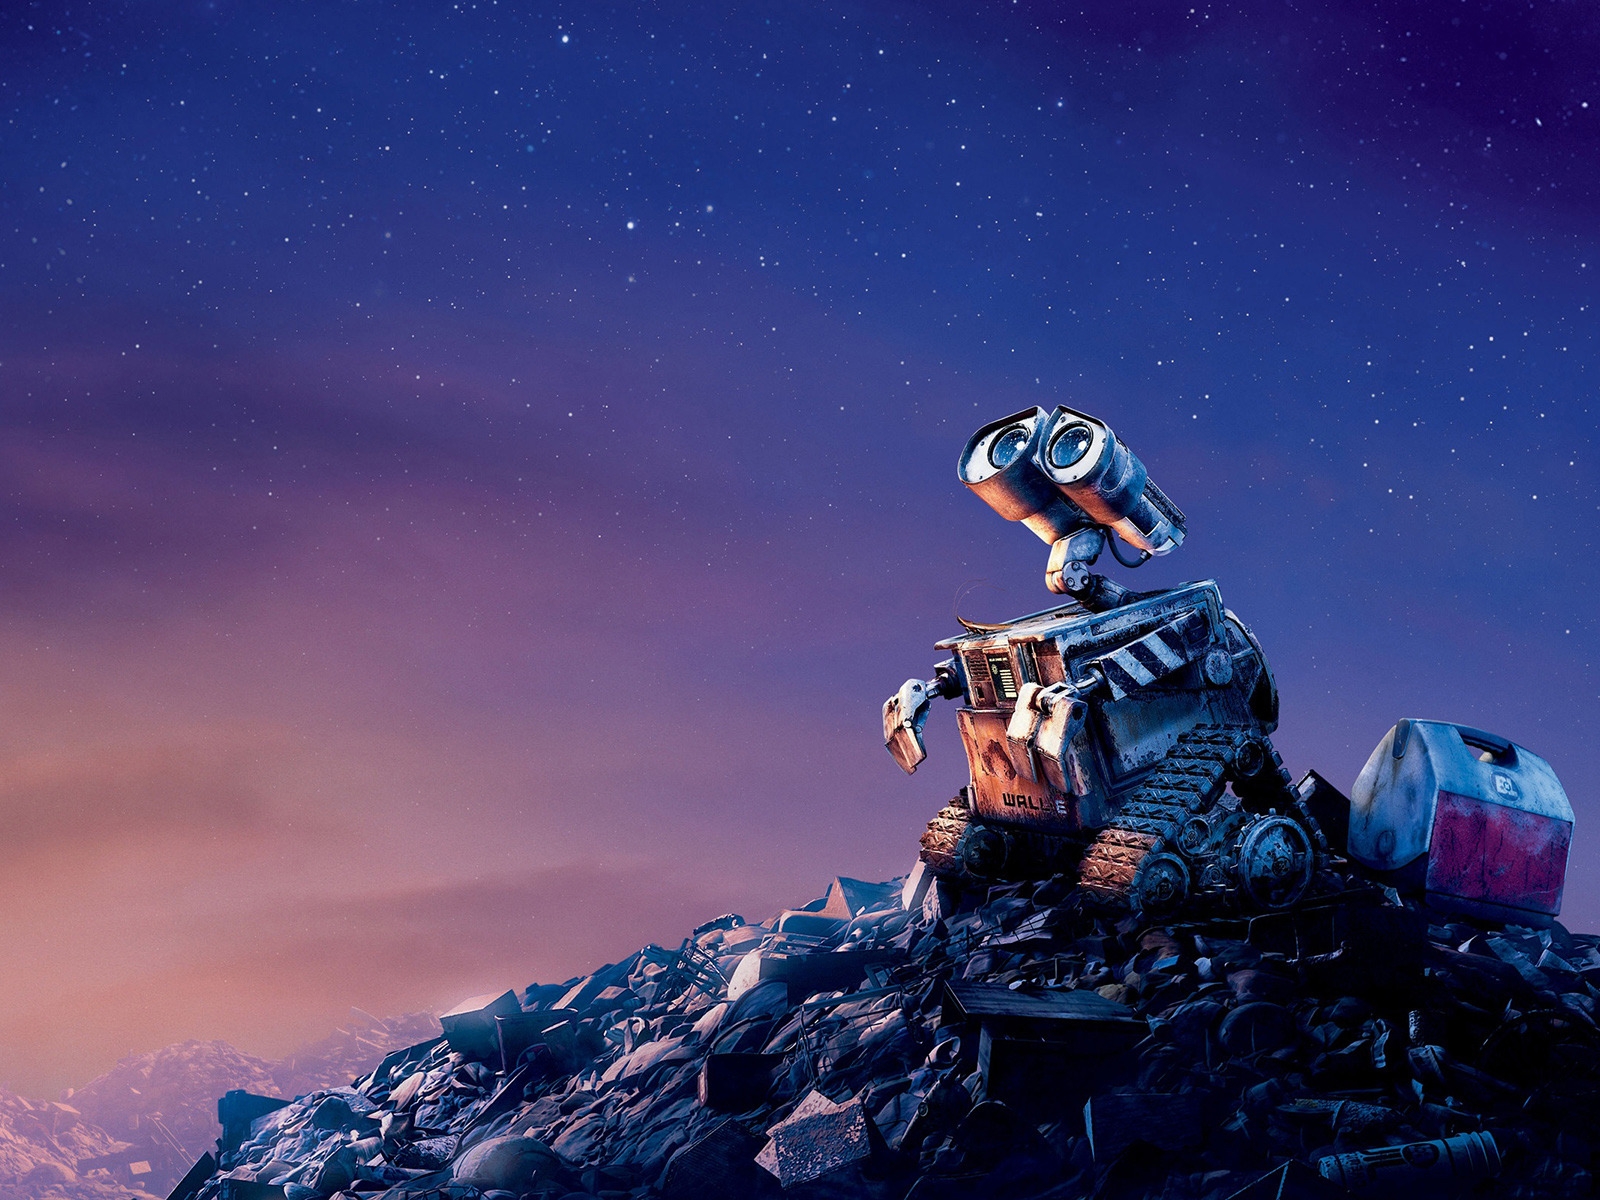 Wall-E for 1600 x 1200 resolution